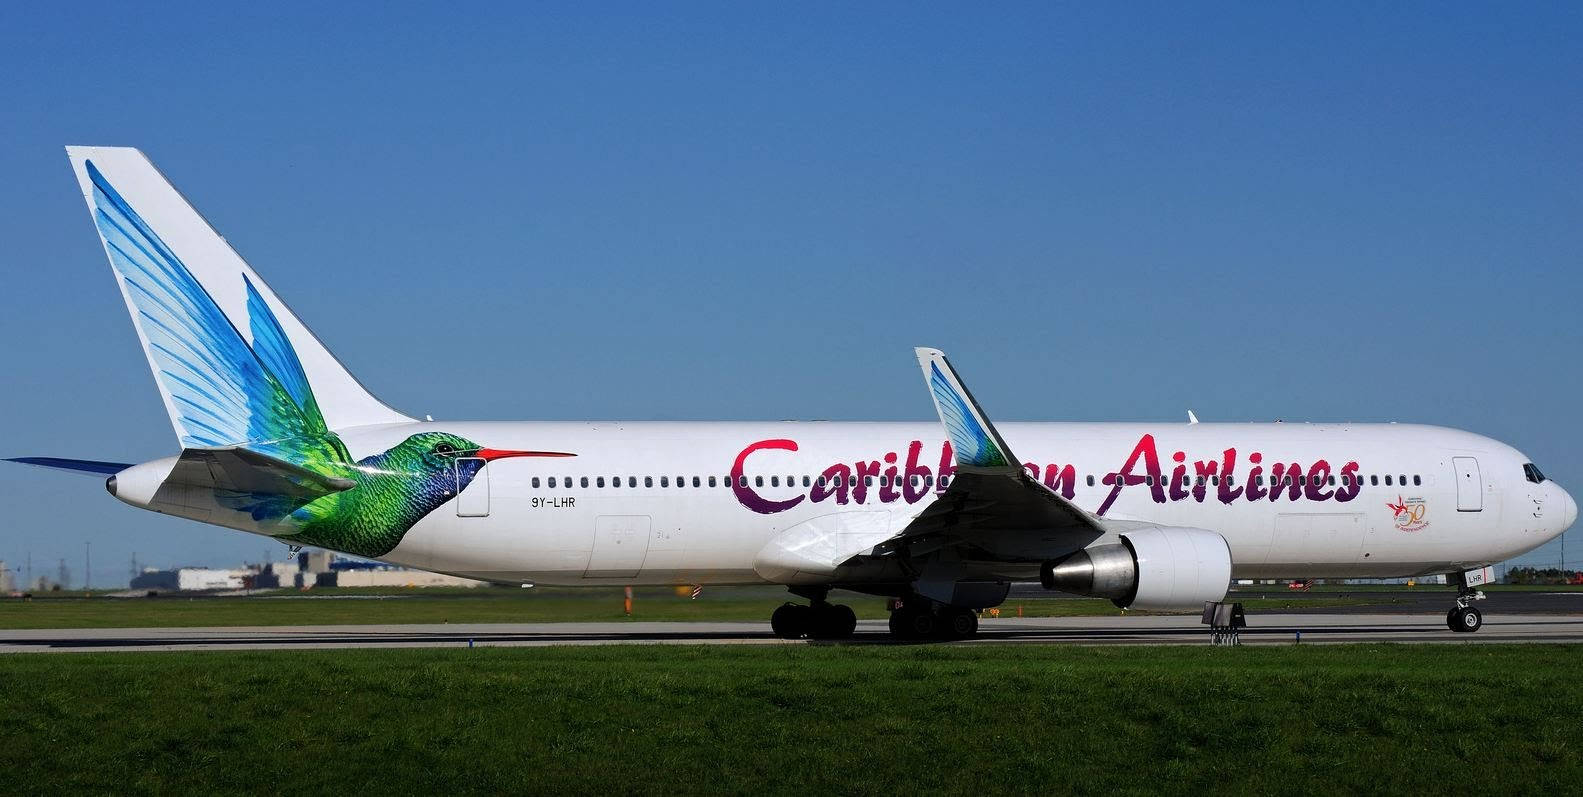 Caribbean Airlines Parked Passenger Airplane Wallpaper